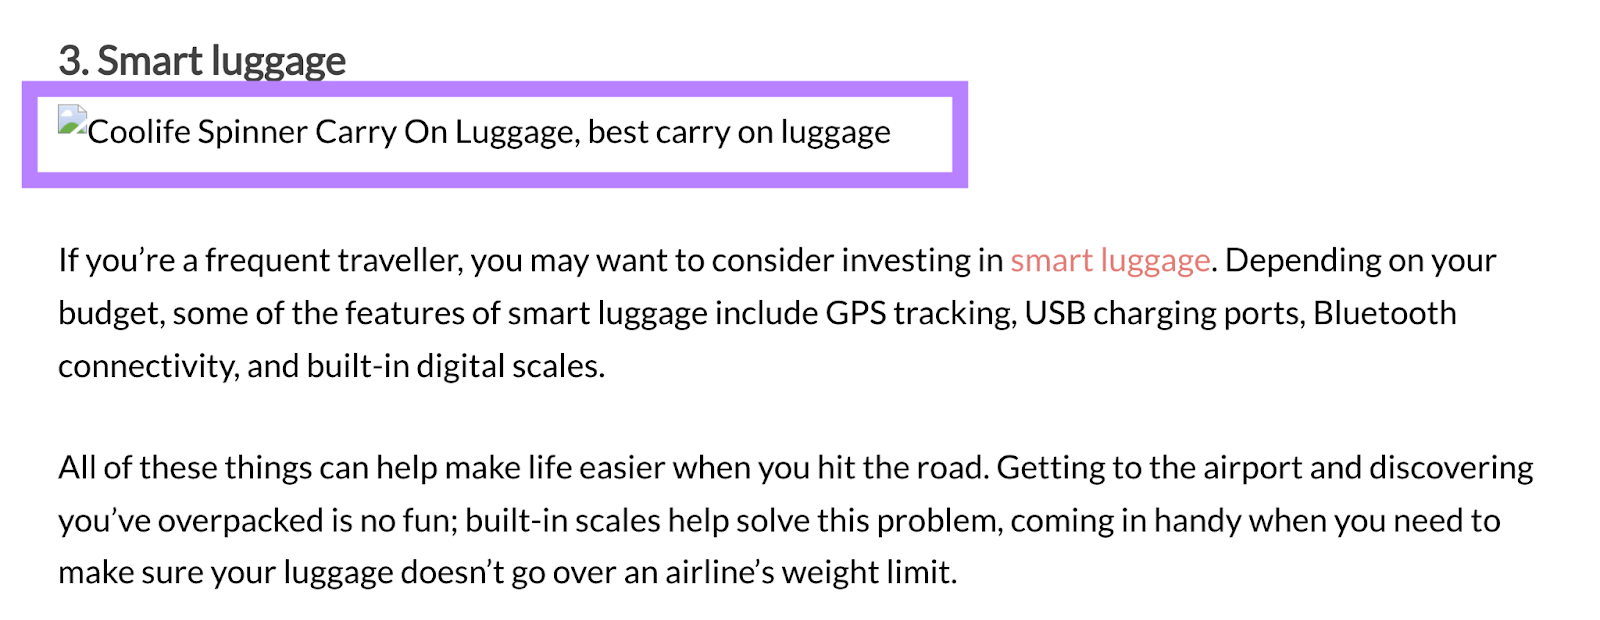 A broken image on a page showing its's alt text instead that reads "Coolife Spinner Carry On Luggage, best carry on luggage"